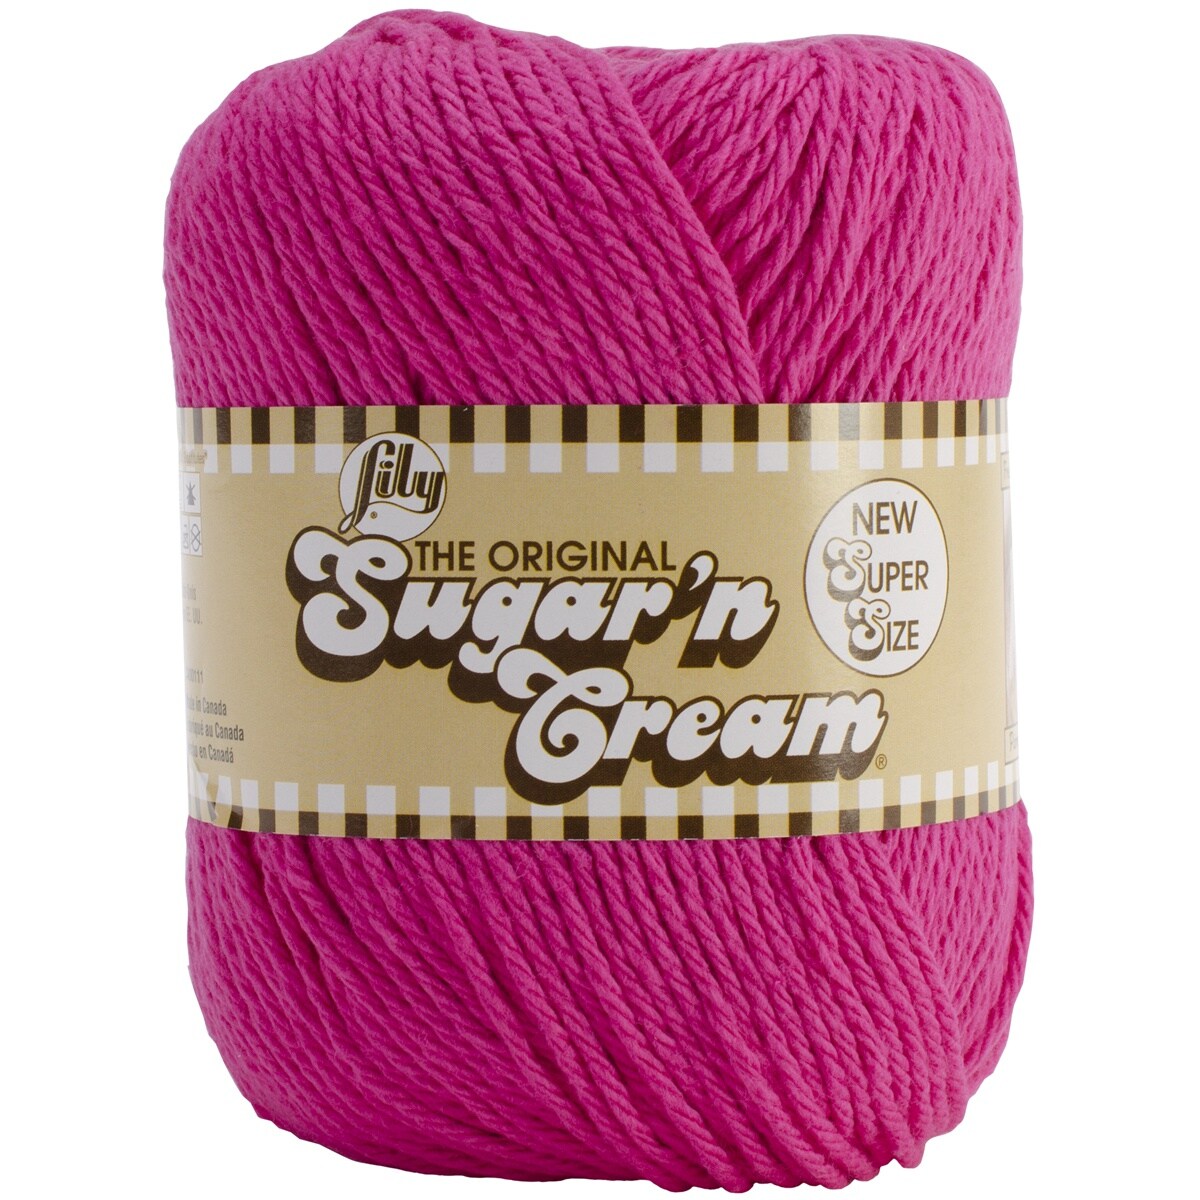 3x50g Beginners Light Pink Yarn, 260 Yards Light Pink Yarn for Crocheting  Knitting, Easy-to-See Stitches, Worsted Medium #4, Chunky Thick Cotton  Nylon